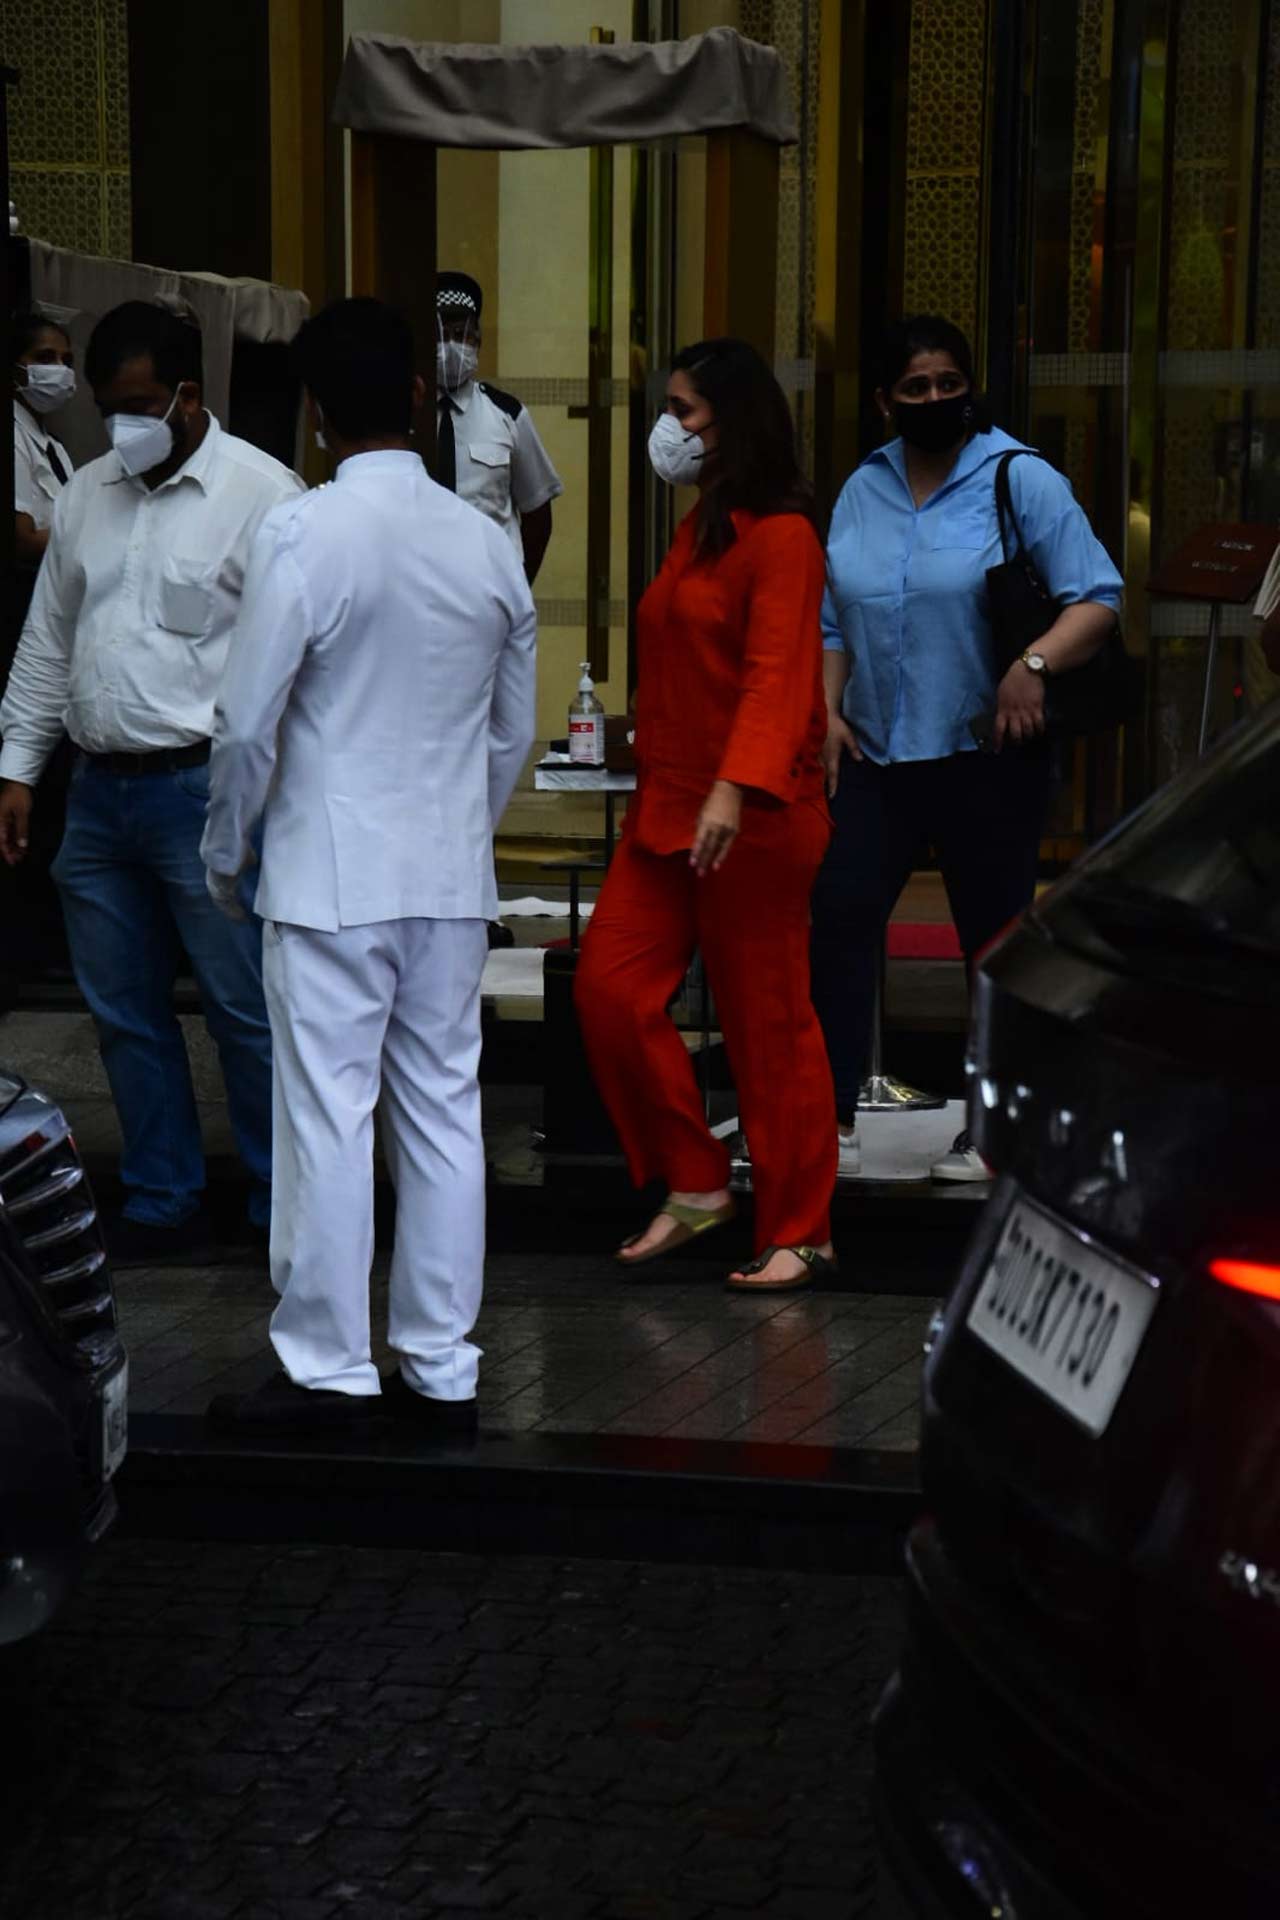 Kareena Kapoor Khan was snapped shooting in Bandra, Mumbai. The actress sported a red coloured casual set for the outing. On the work front, Kareena will be next seen in Aamir Khan's Laal Singh Chaddha, which is an official adaptation of Forrest Gump.